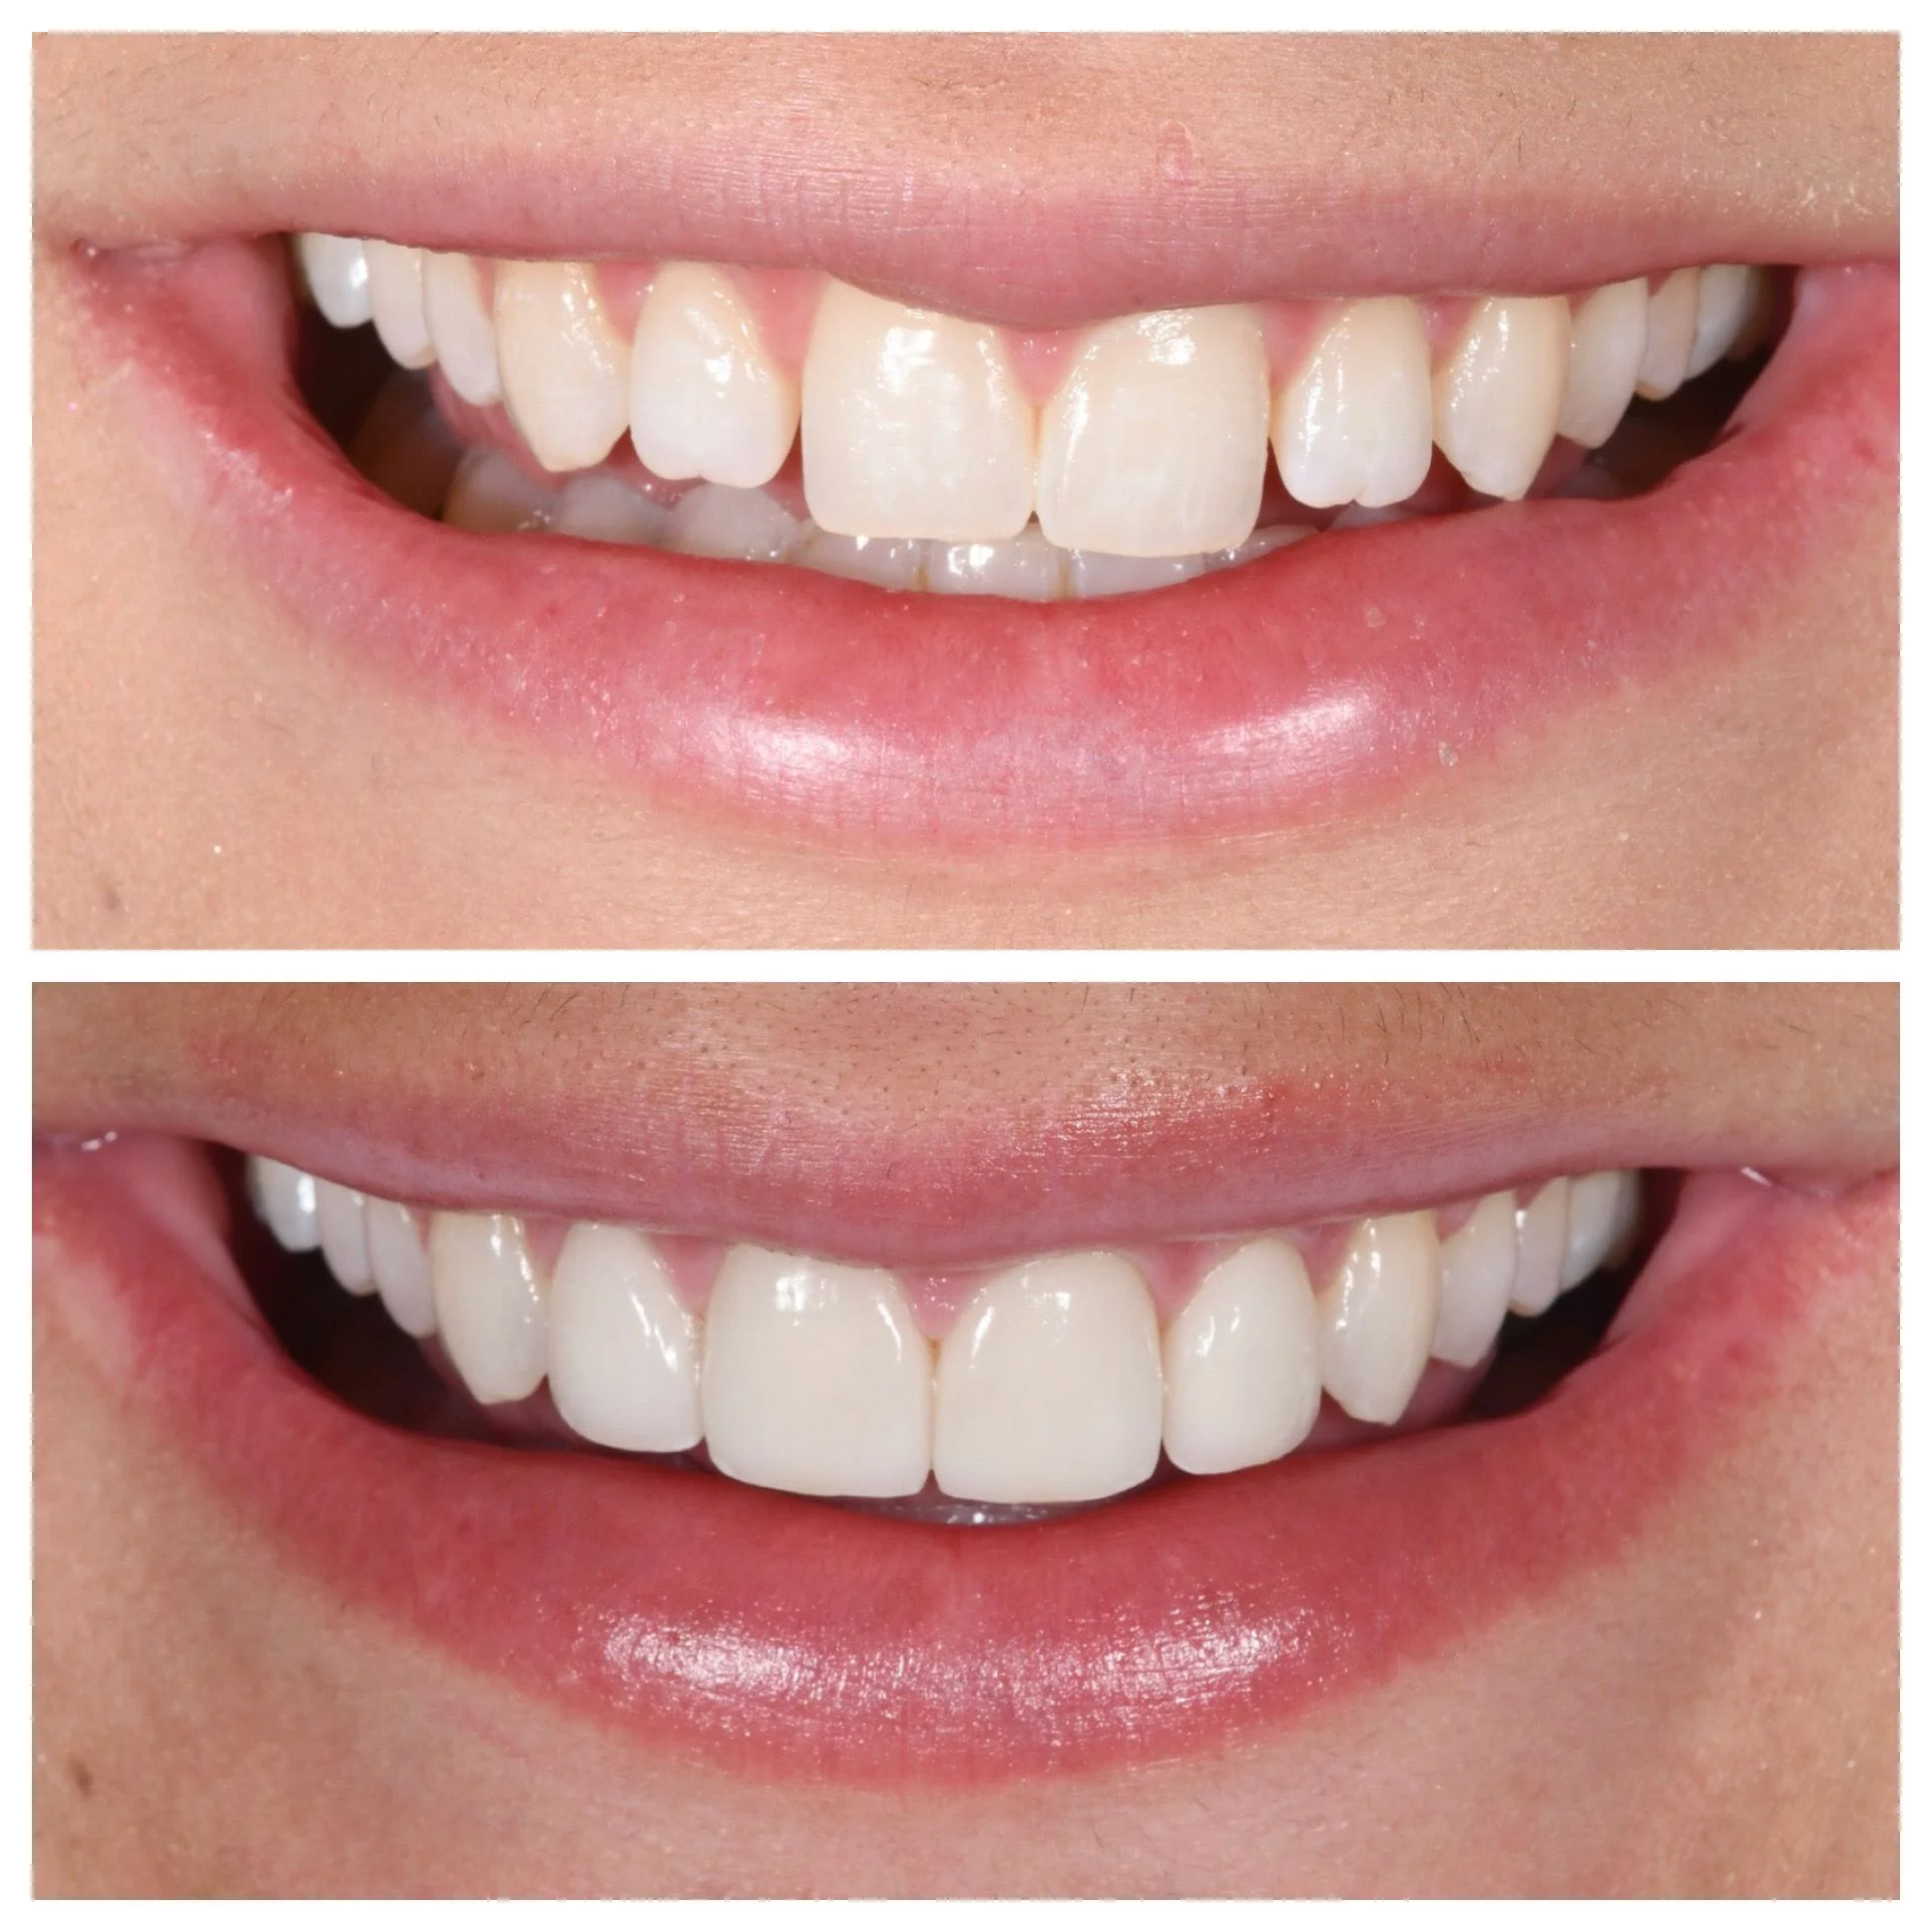 4 veneers to correct size and space